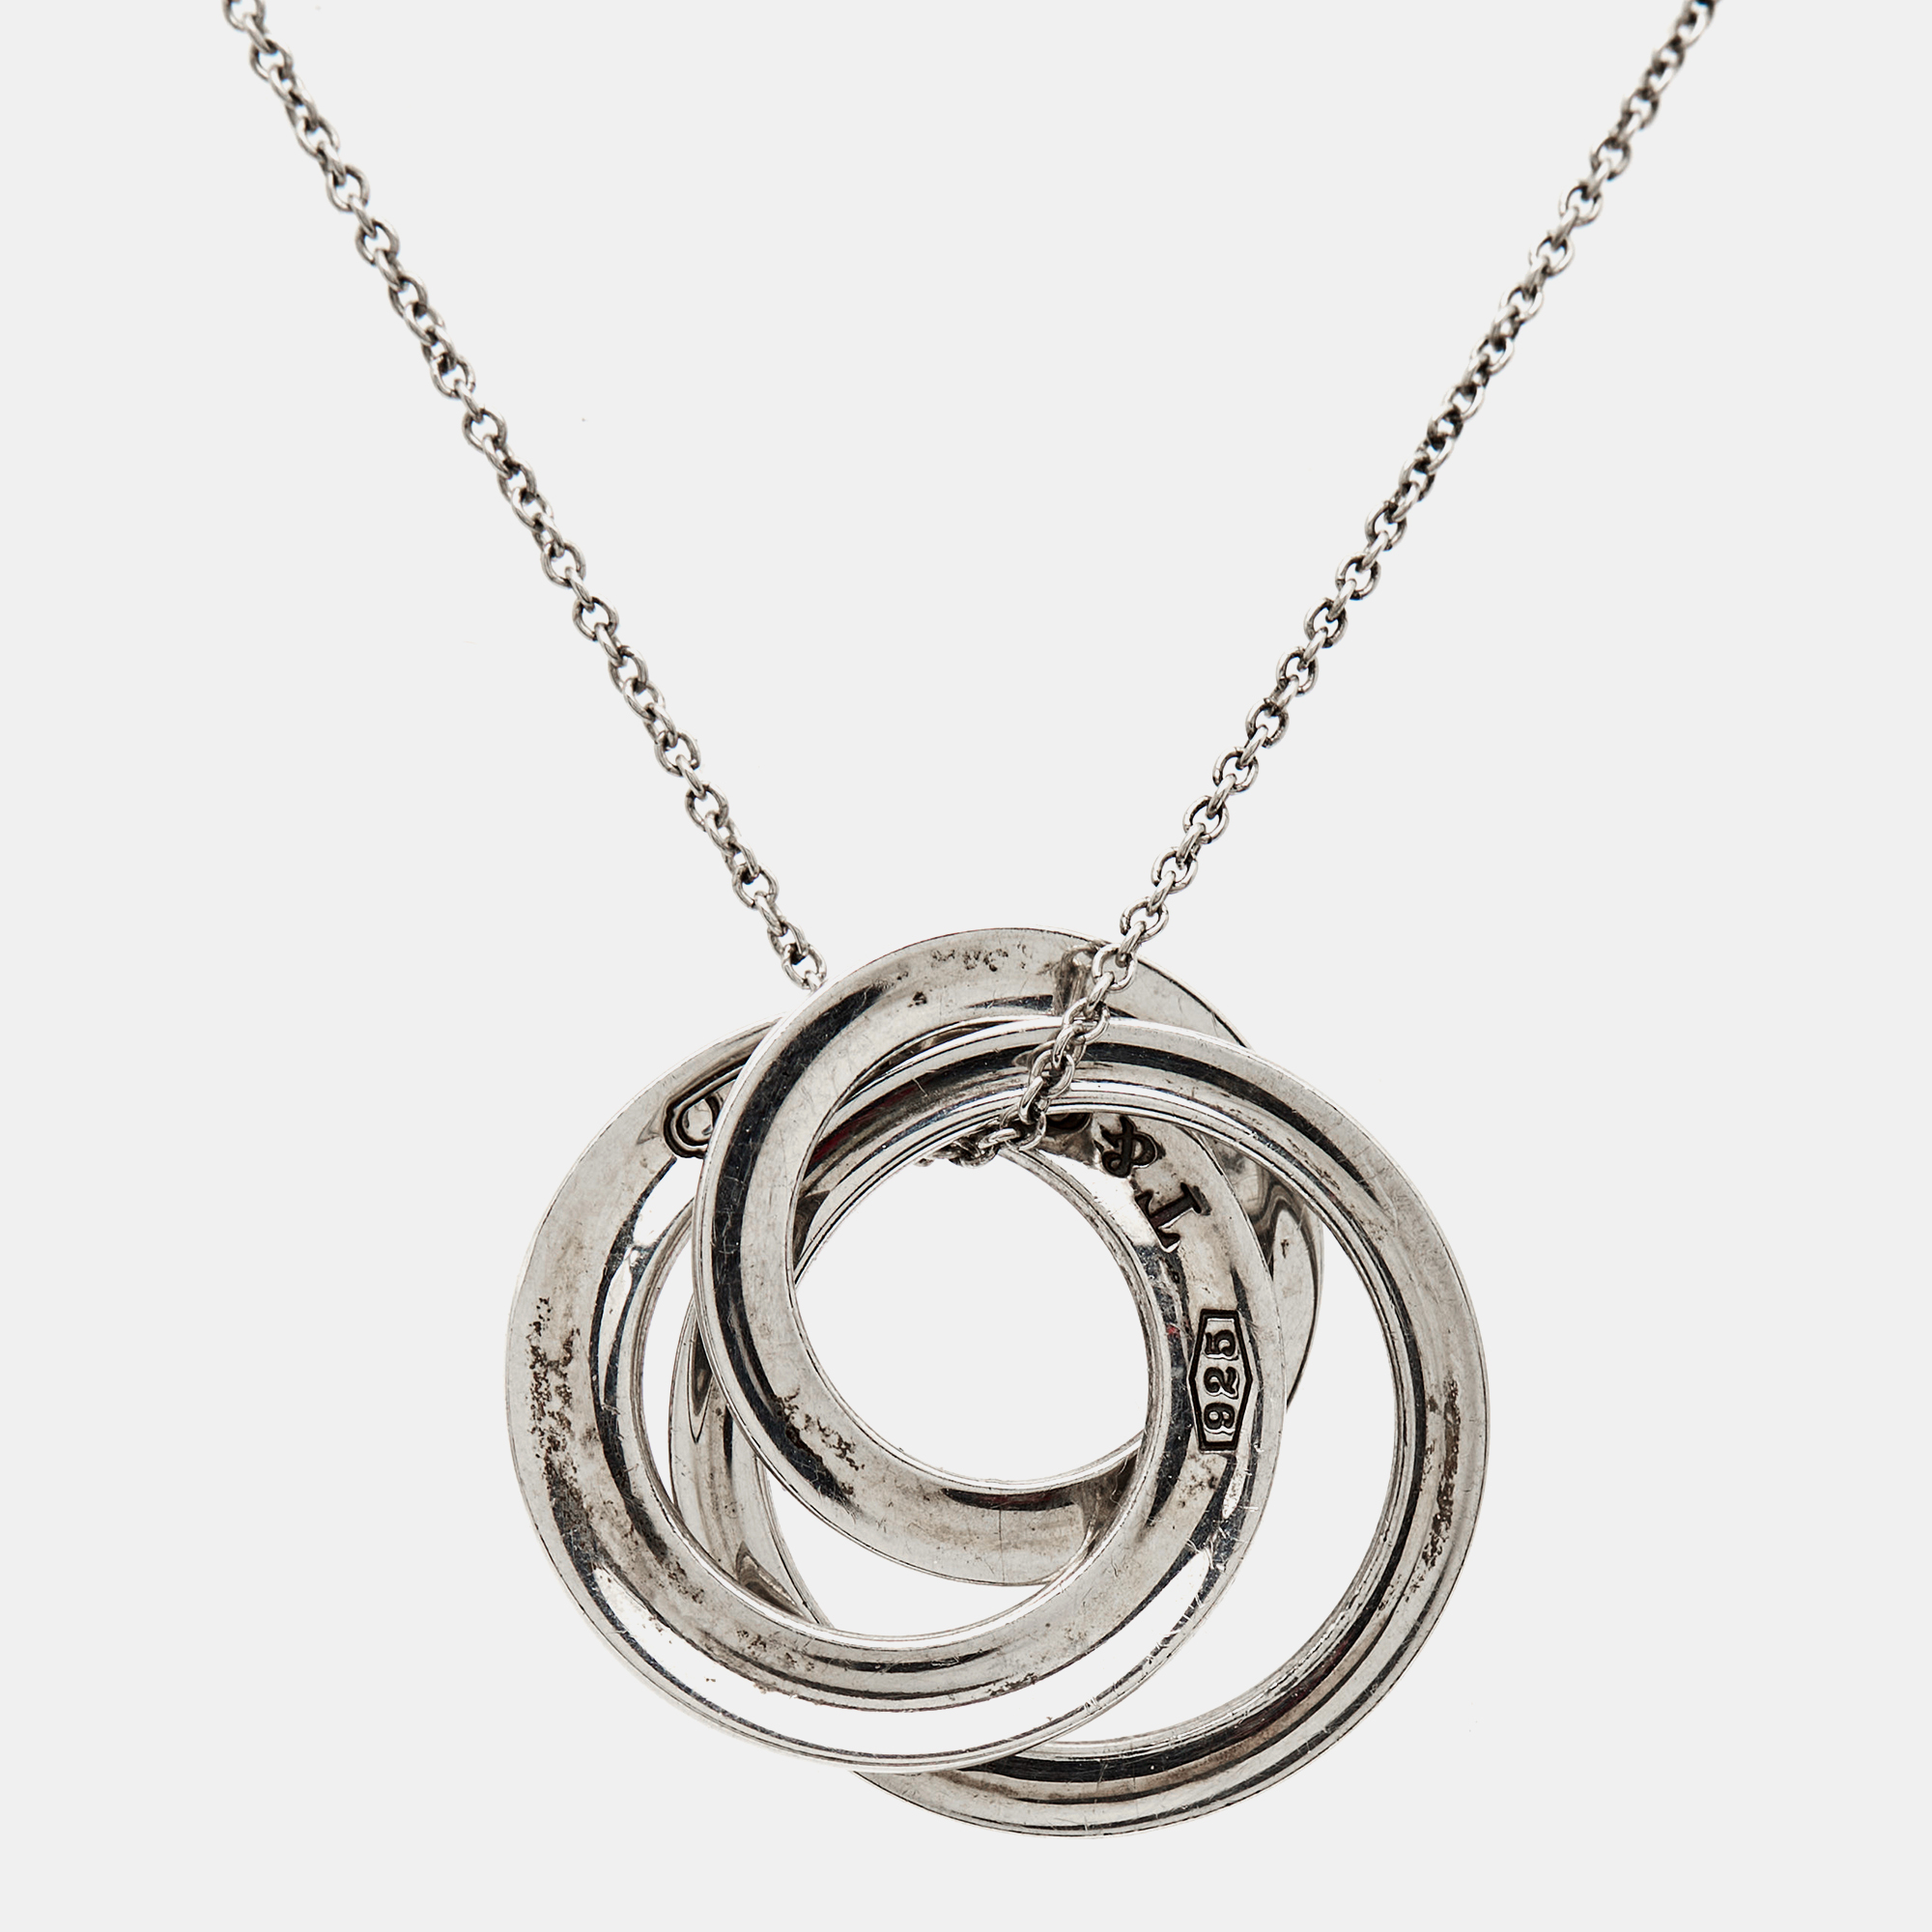 Tiffany & Co. 1837 Interlocking Circles Sterling Silver Necklace